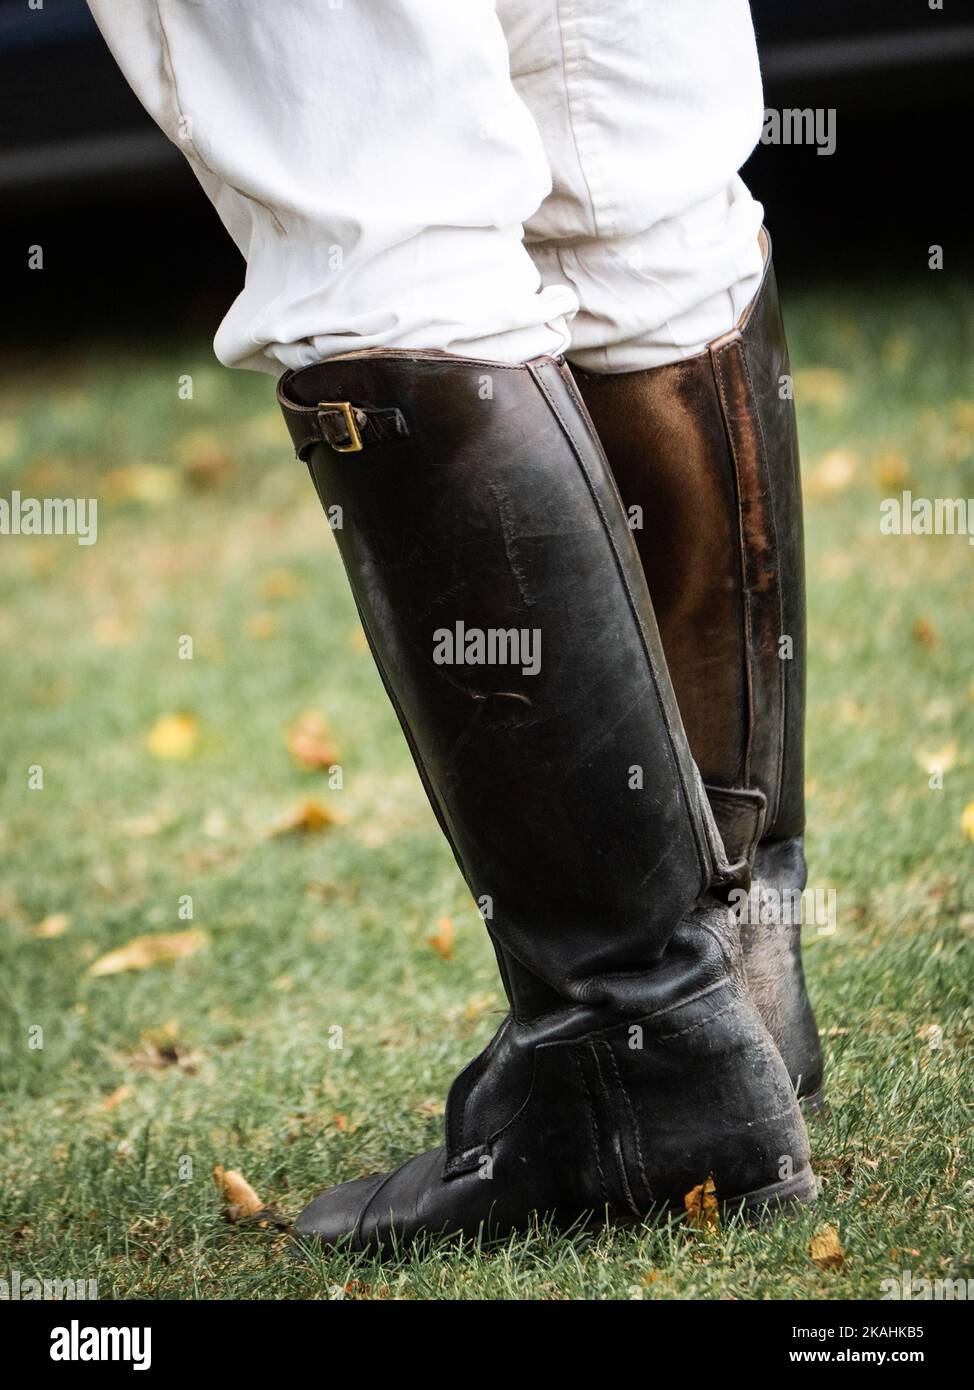 Male polo playing riding boots Stock Photo - Alamy